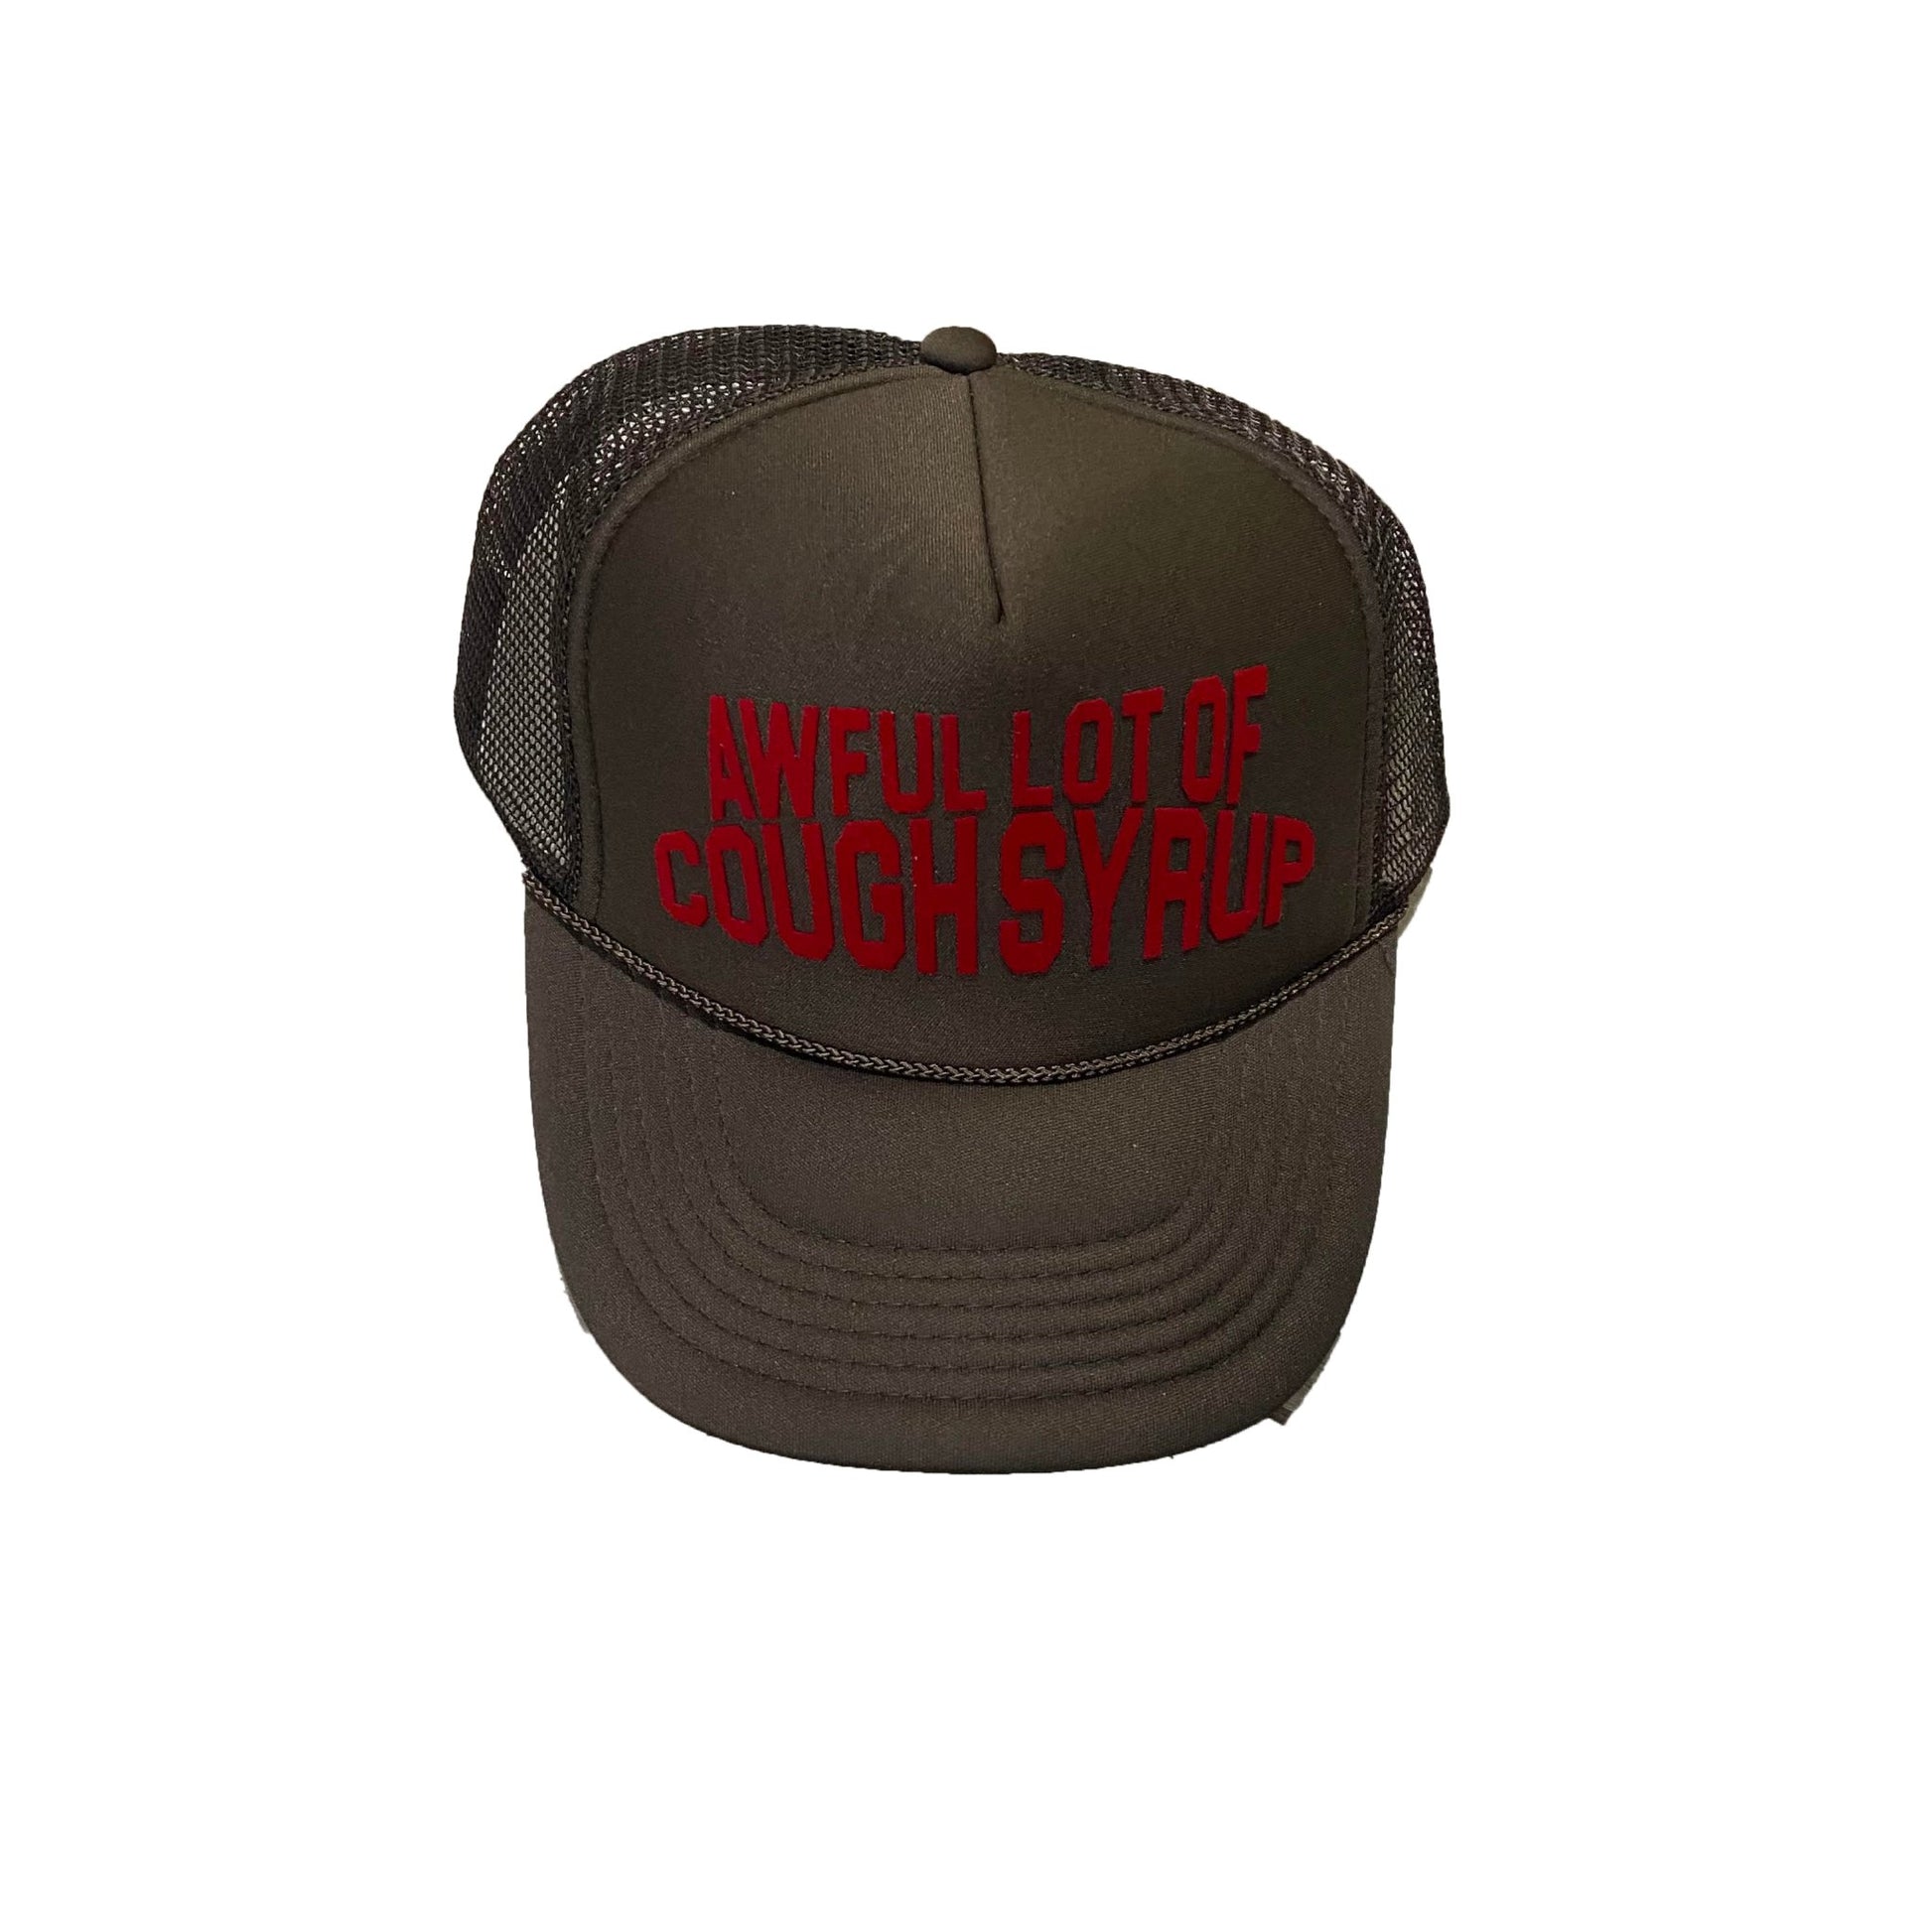 $250.00 - Poligo Sneakers Sale Online - slogan-embroidered bucket hat -  That's A Awful Lot Of Cough Syrup Trucker Hat Brown Red